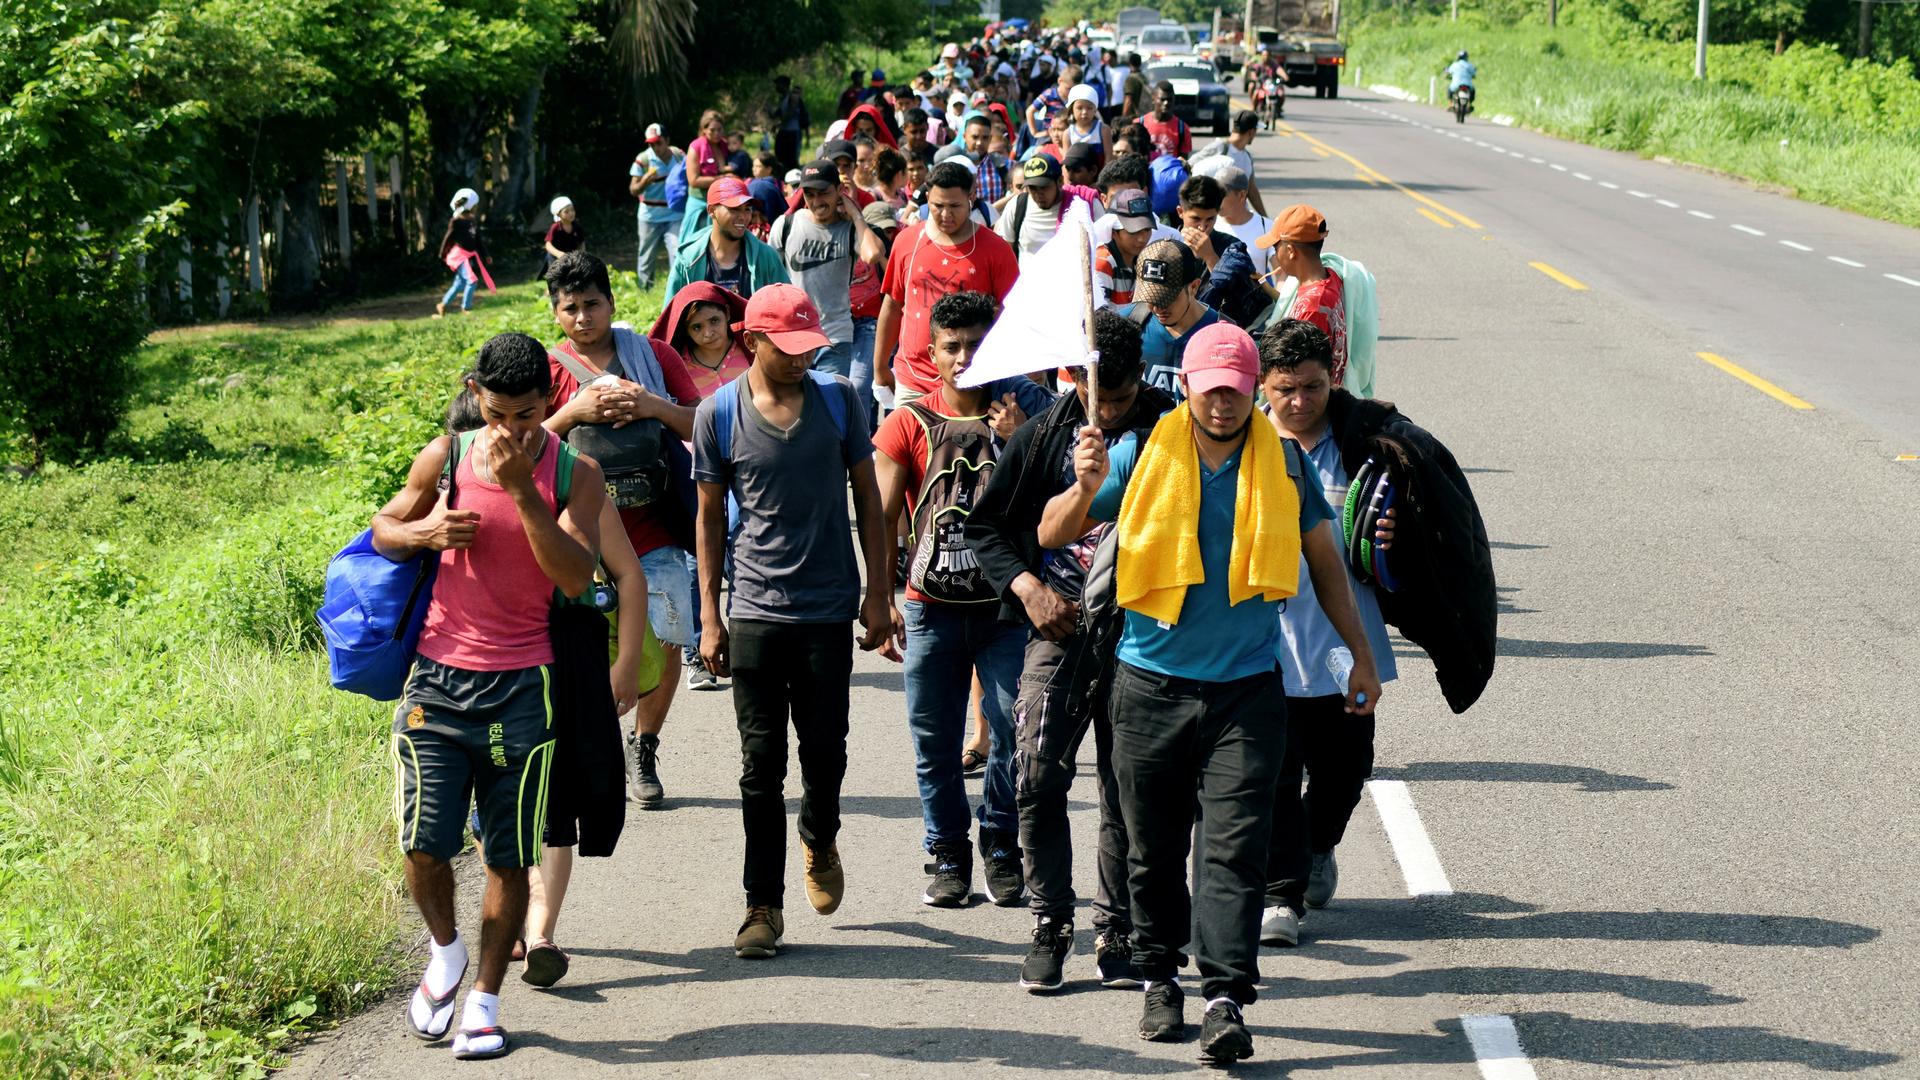 A line of migrants carries bags and walks on a road 